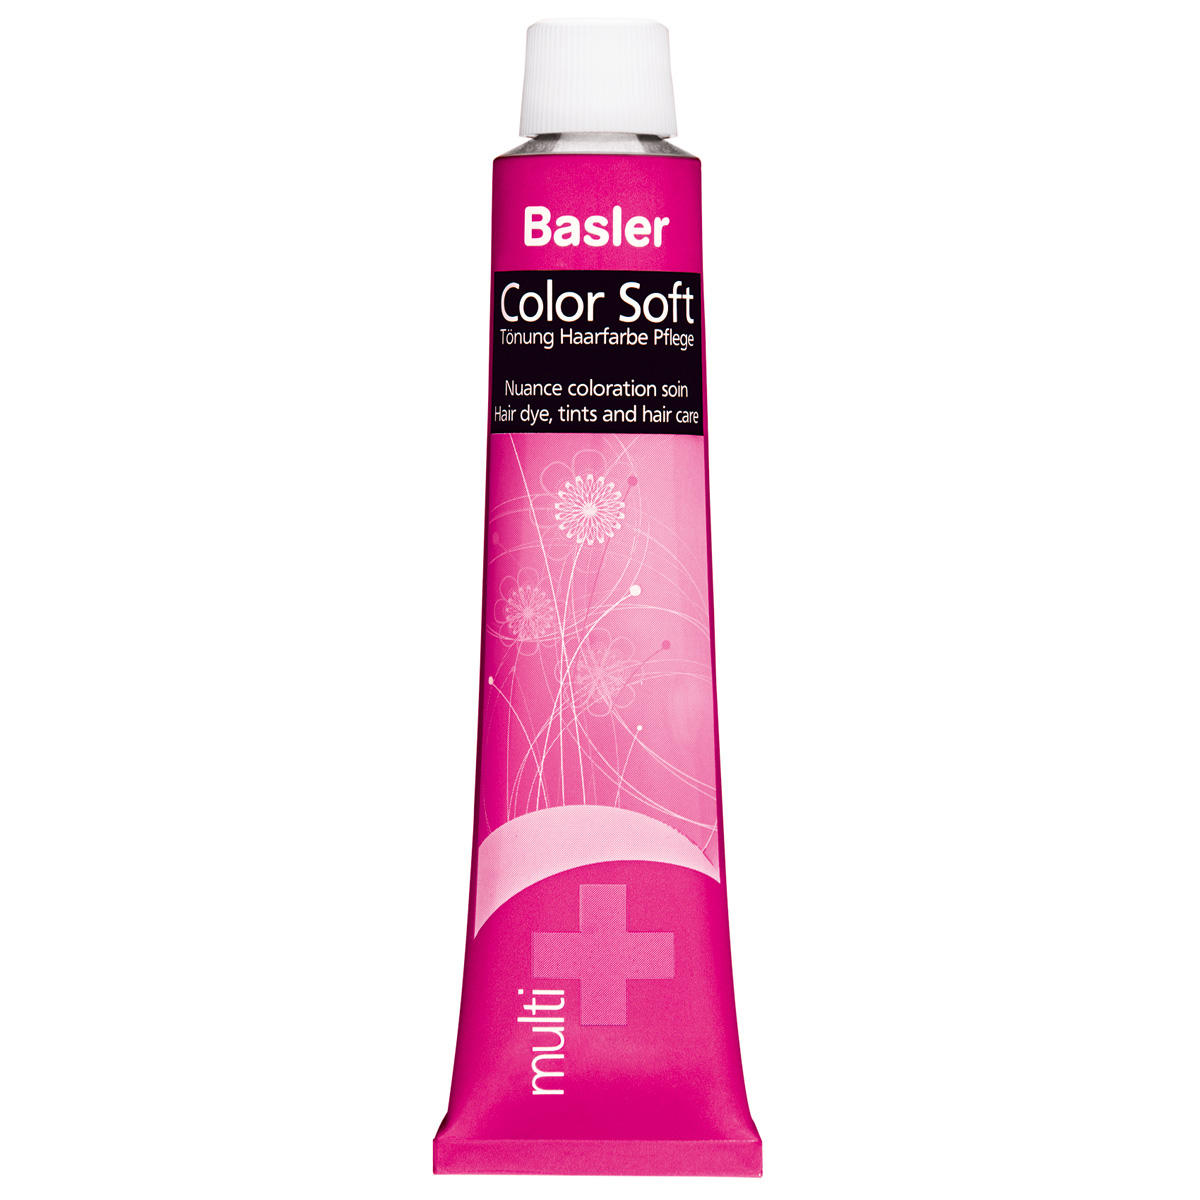 Basler Color Soft multi Caring Cream Color 6/7 dark blond brown - chocolate brown, tube 60 ml - 1